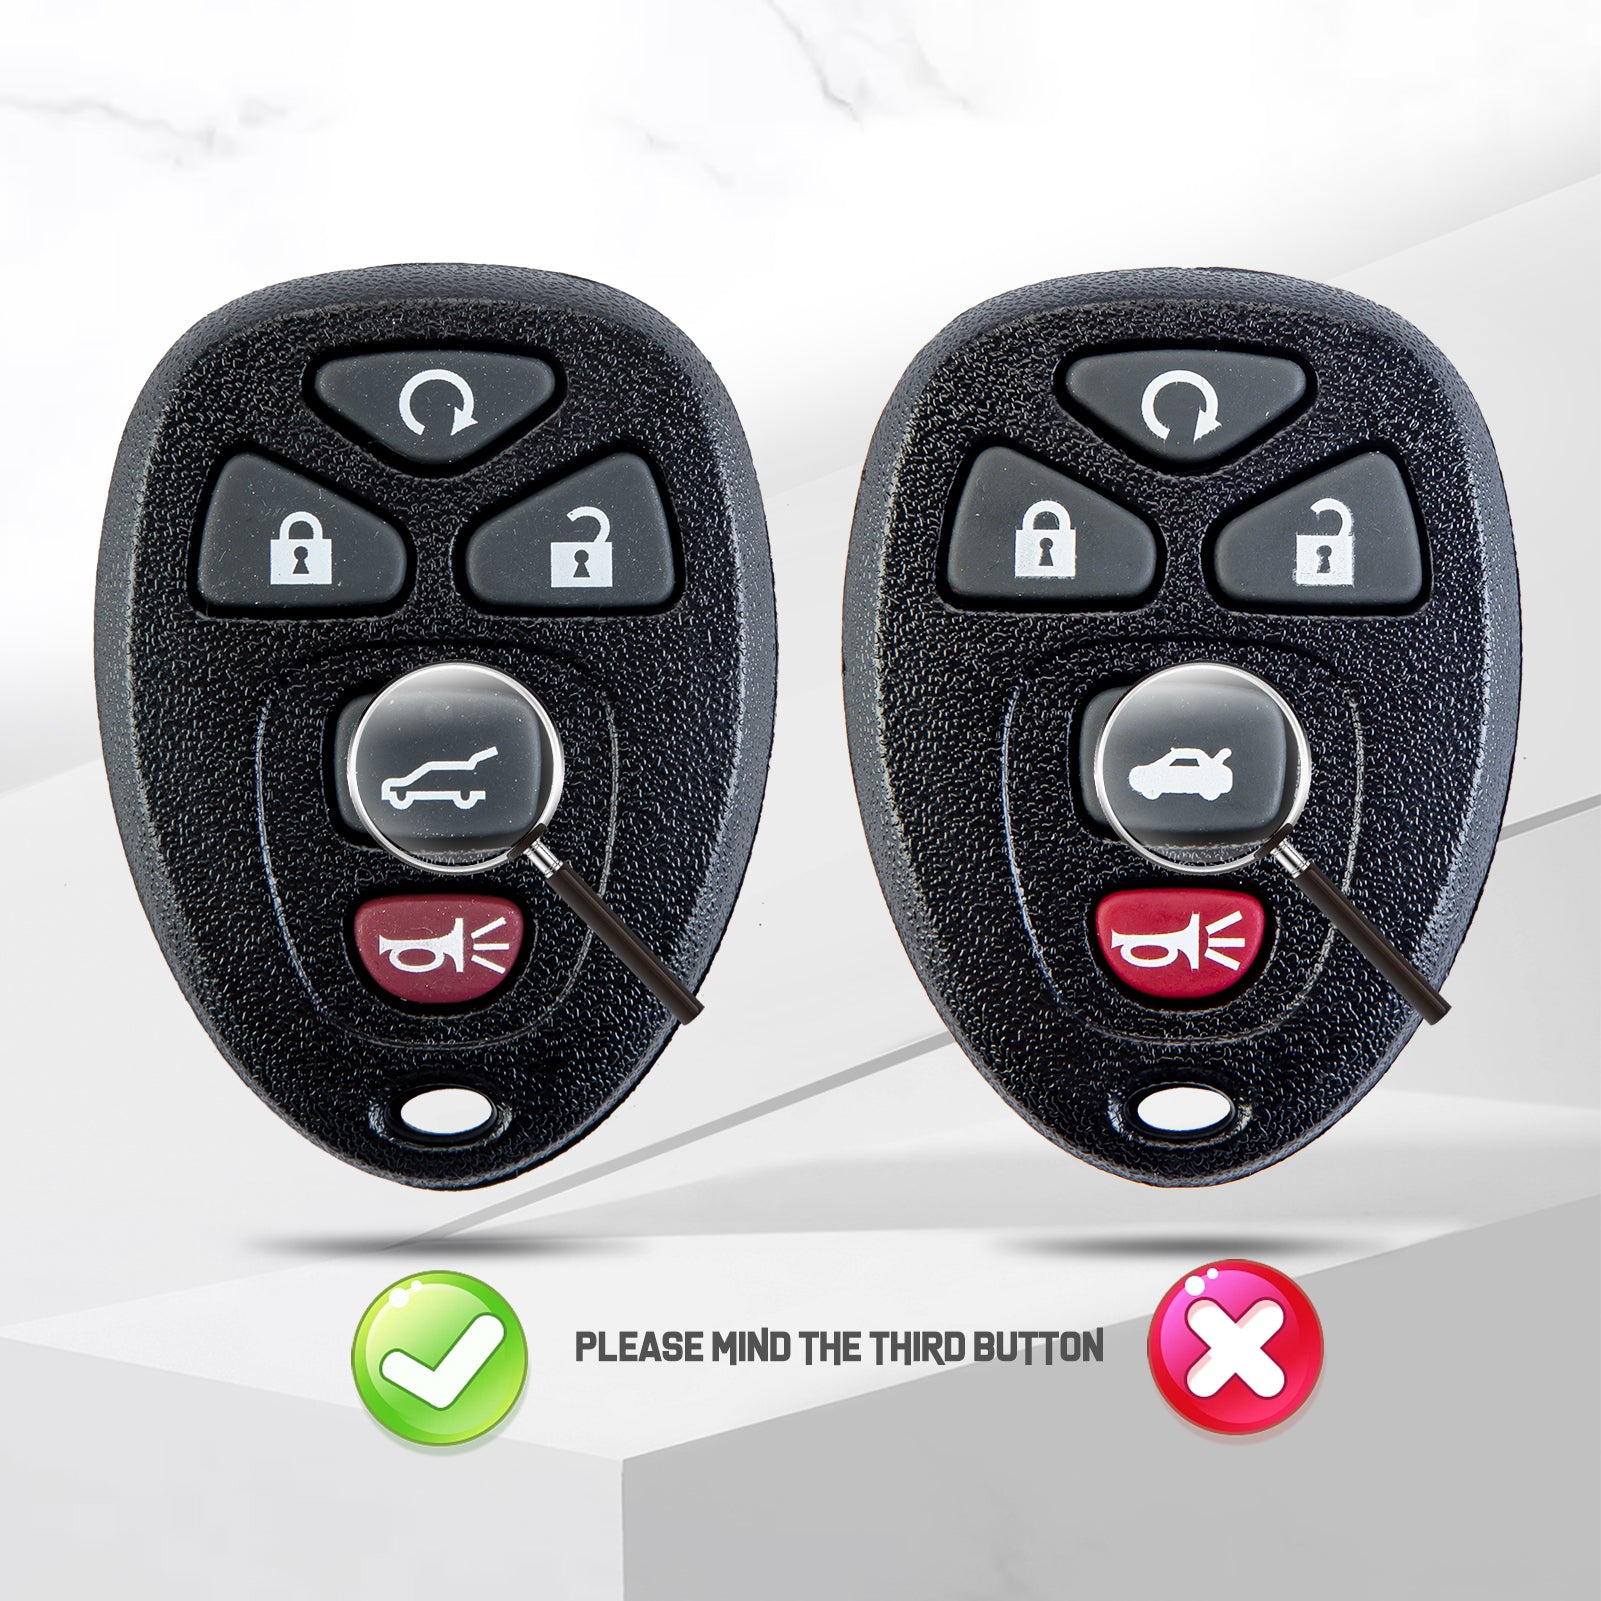 5 BTN Car Key Fob Replacement for Gm Alarm Keyless Entry Key Fob 315 MHZ. 22936101 OUC60270